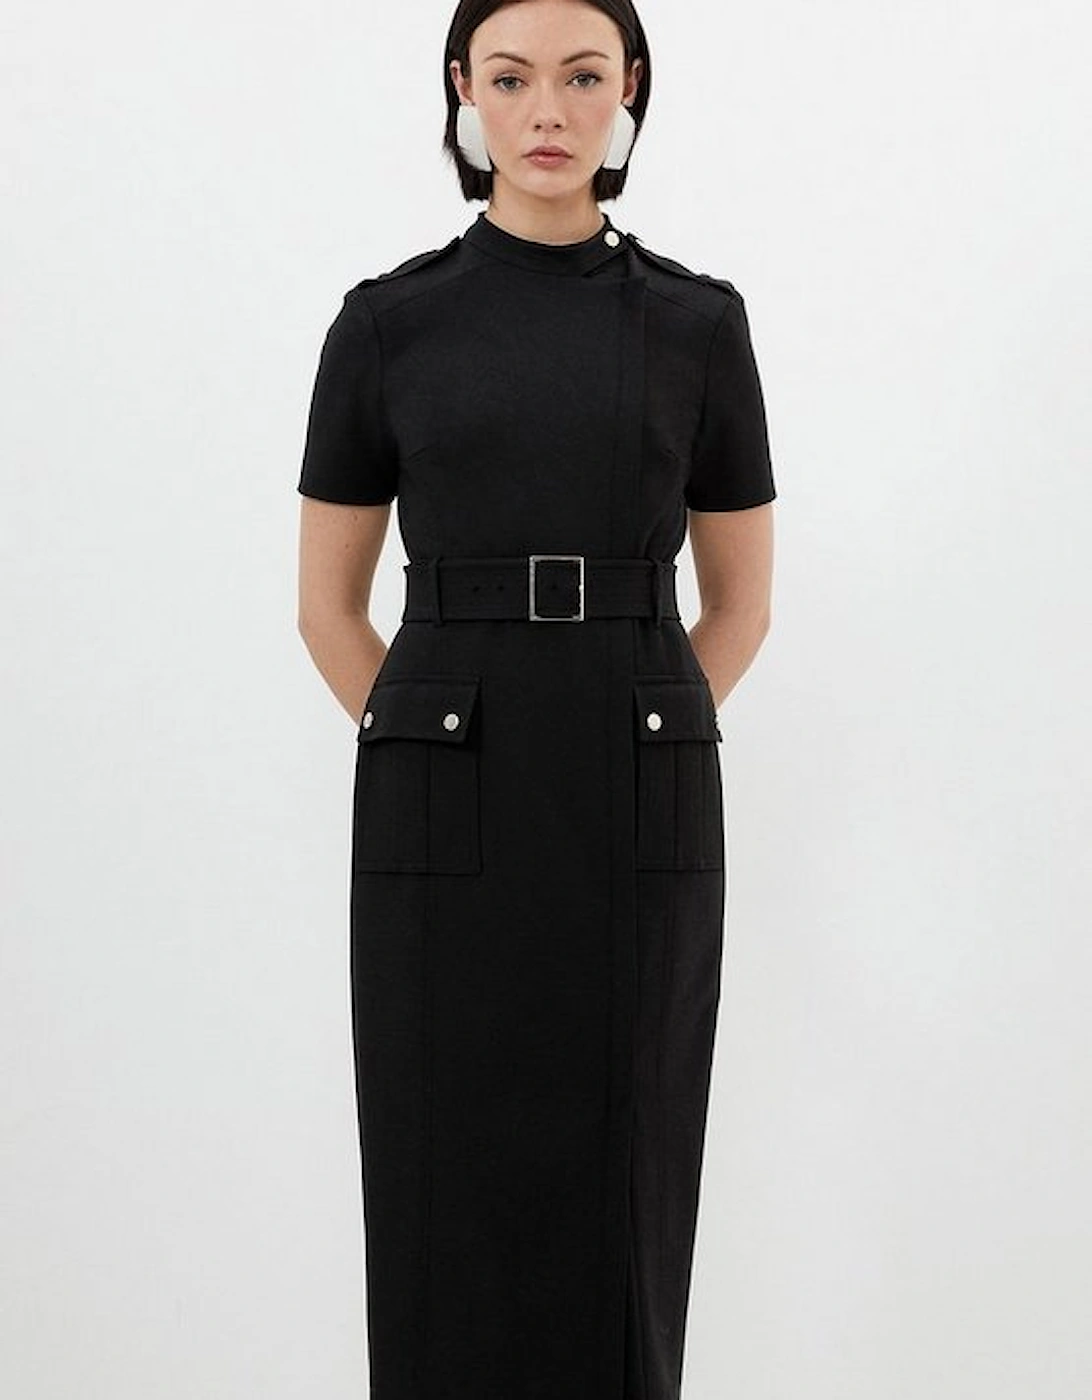 Petite Compact Stretch Wrap Belted Tailored Midi Dress